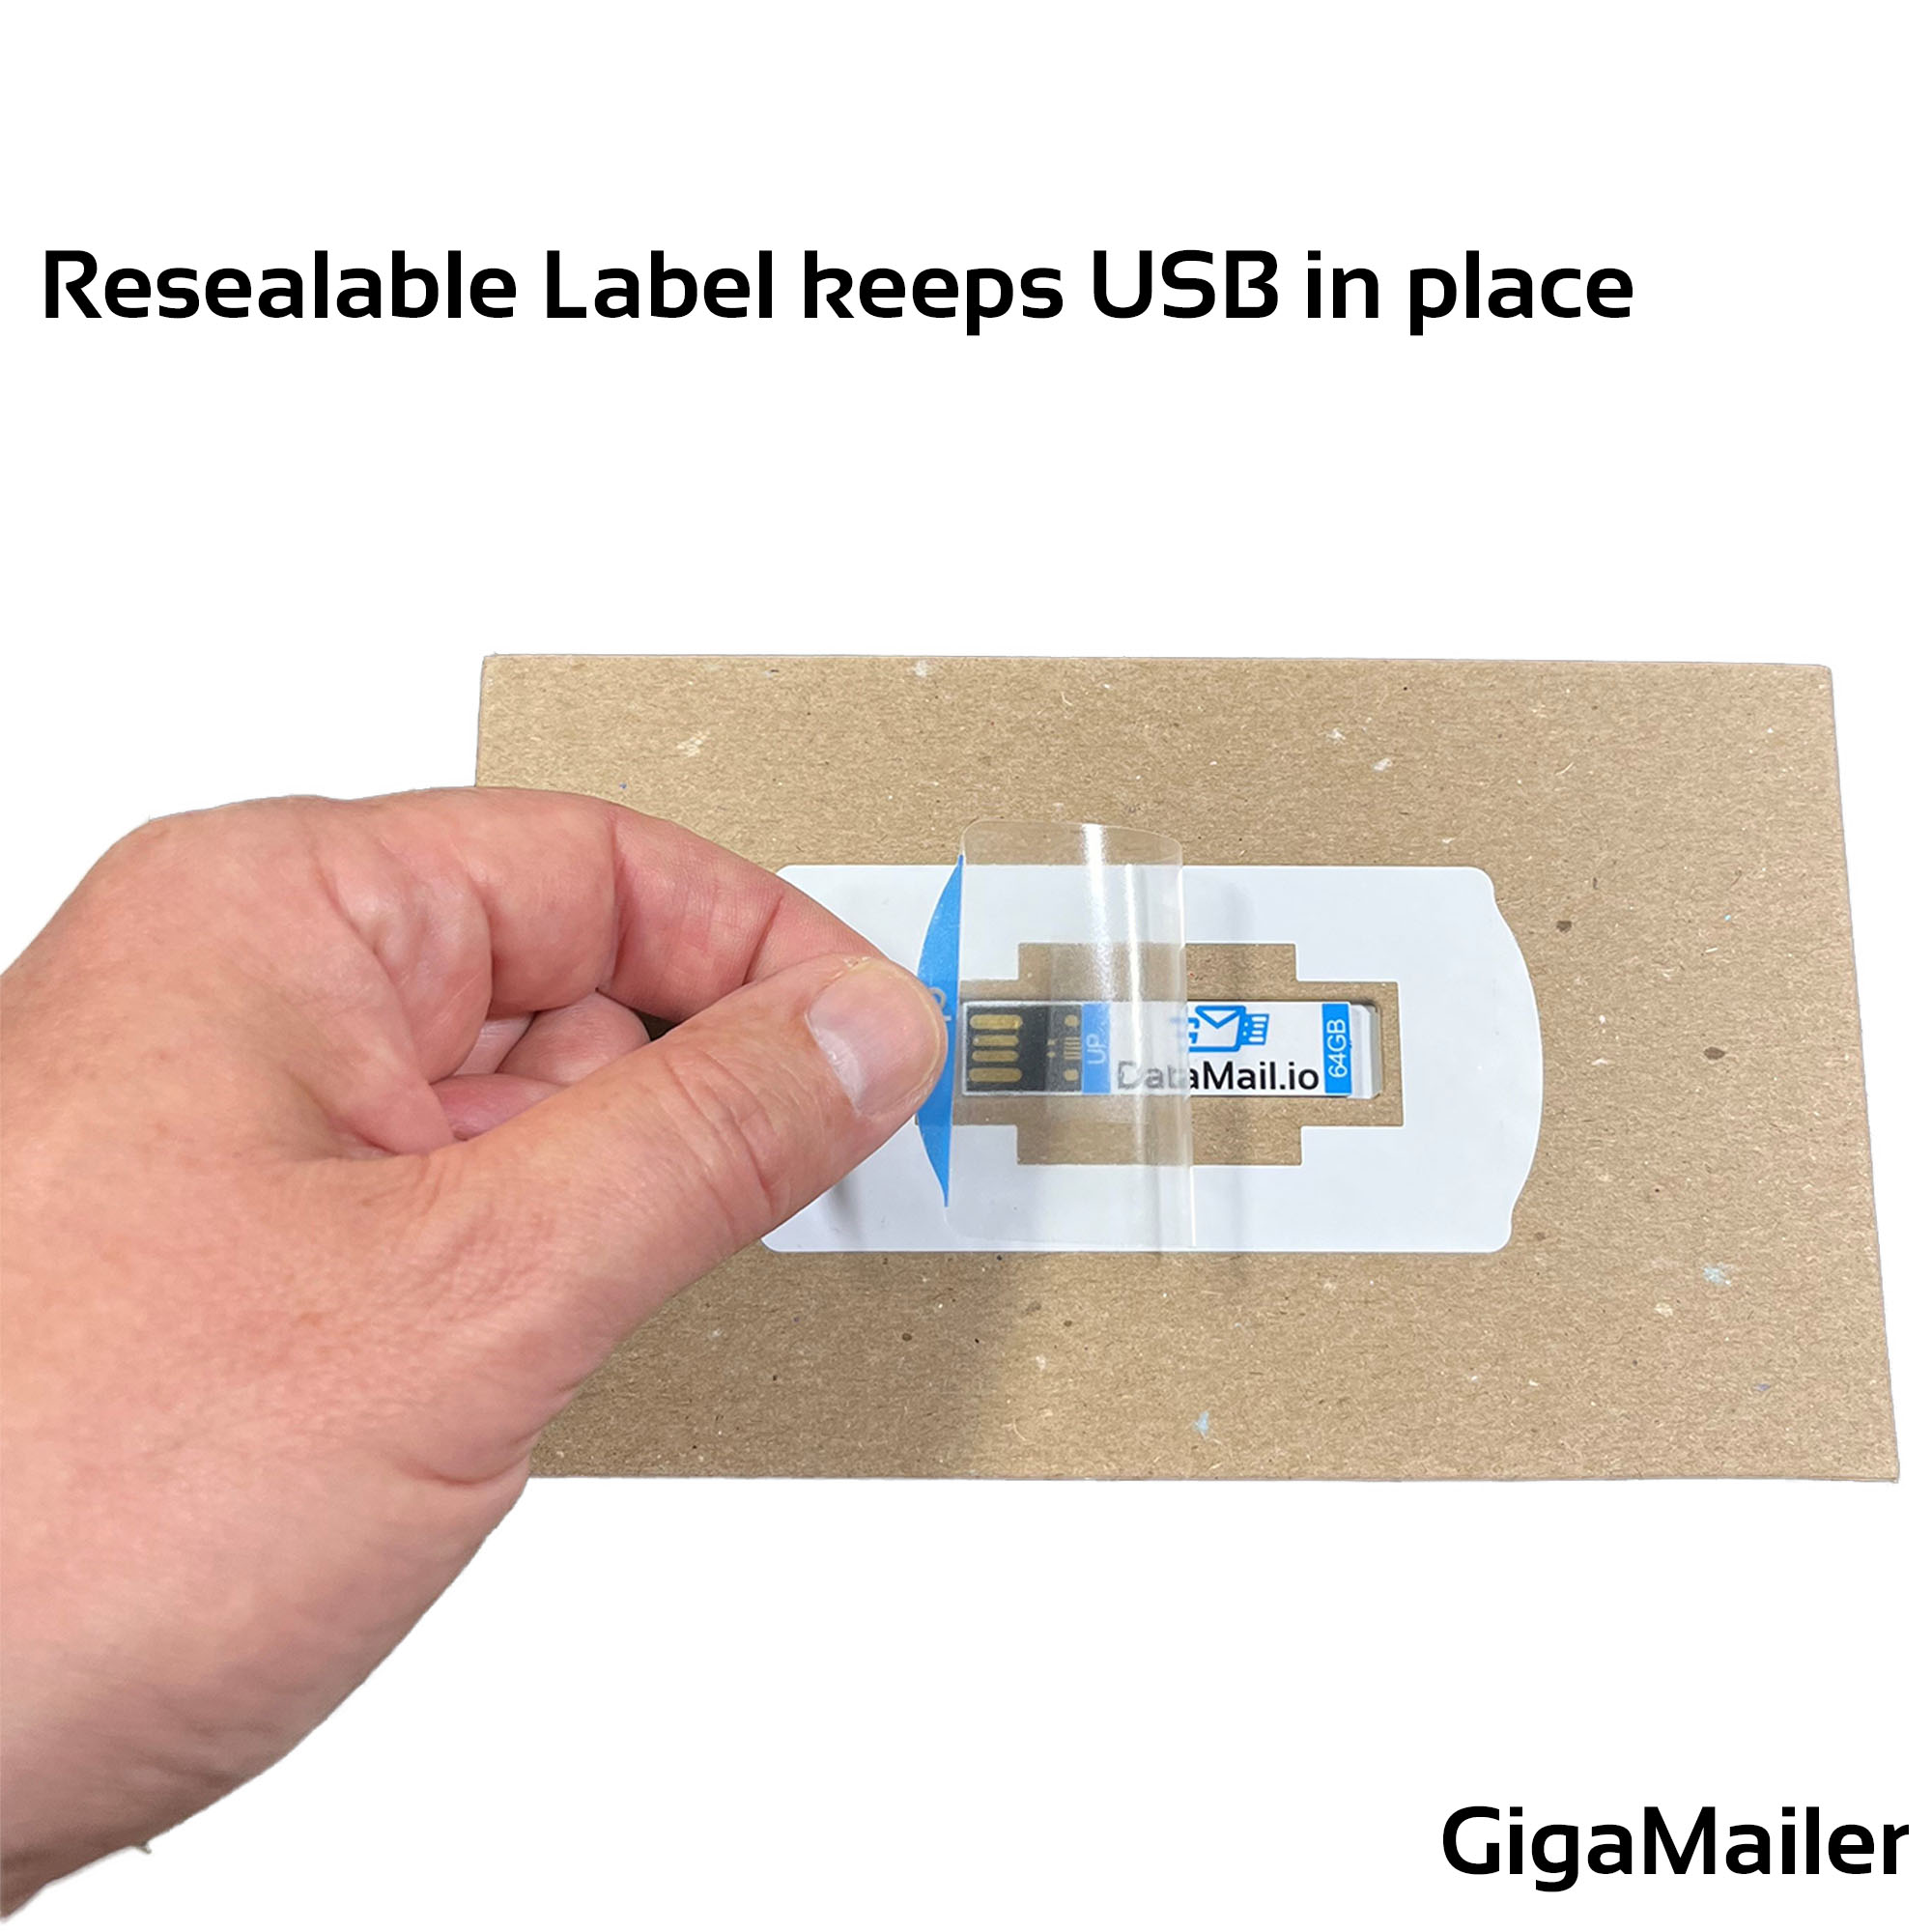 Resealable label keeps USB in place